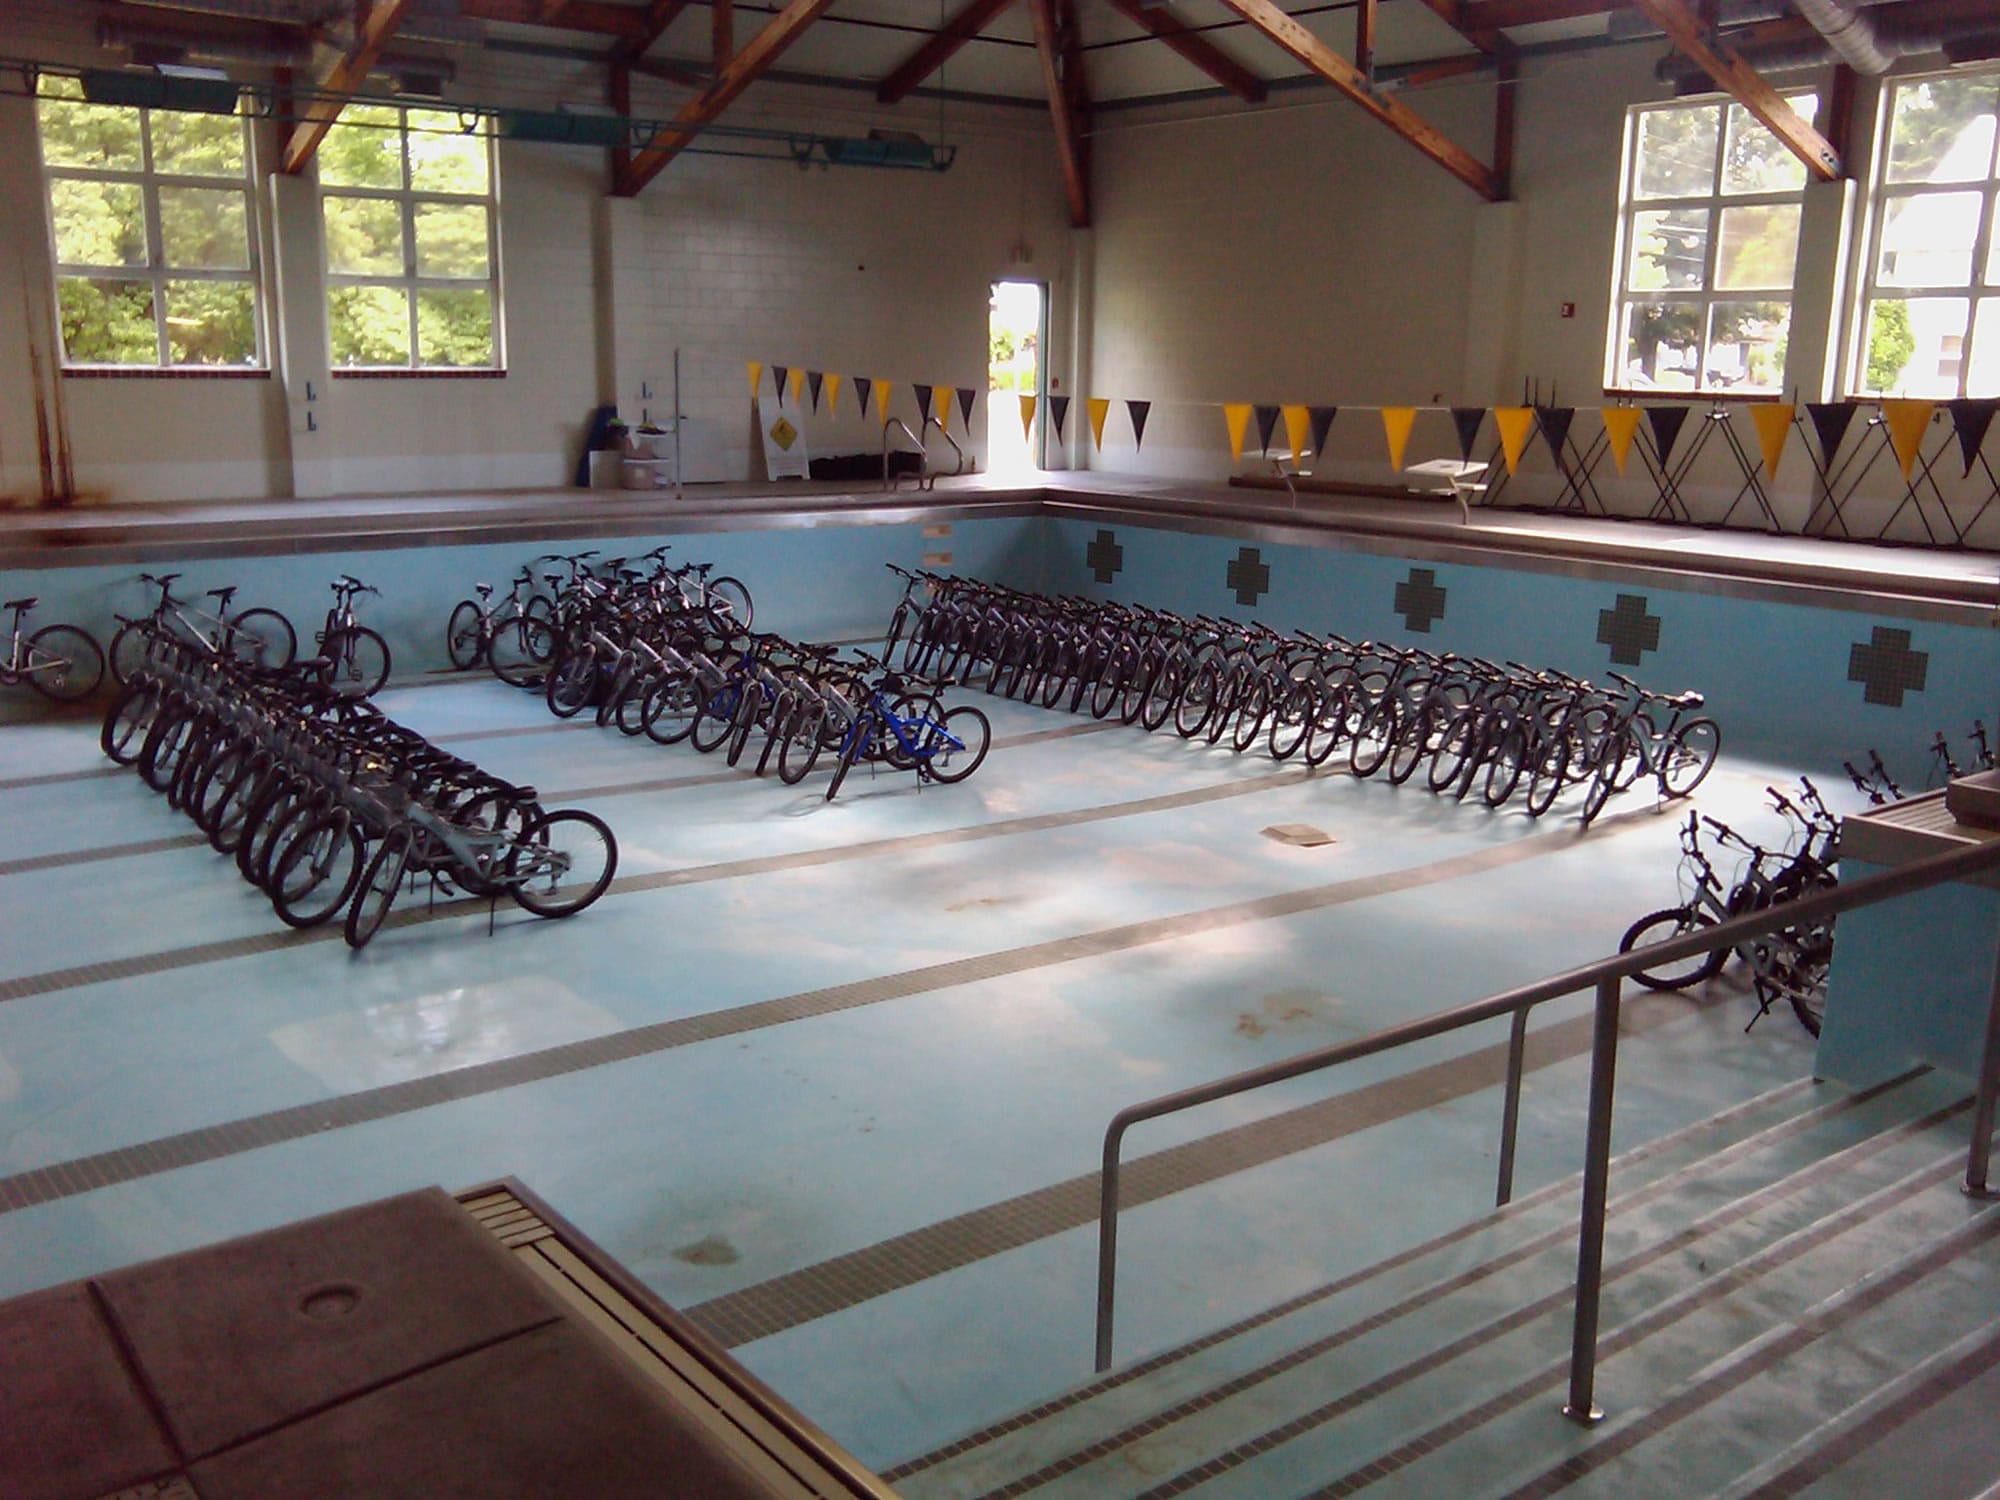 Bike Clark County stored bikes used in its safety program at Hough Pool.